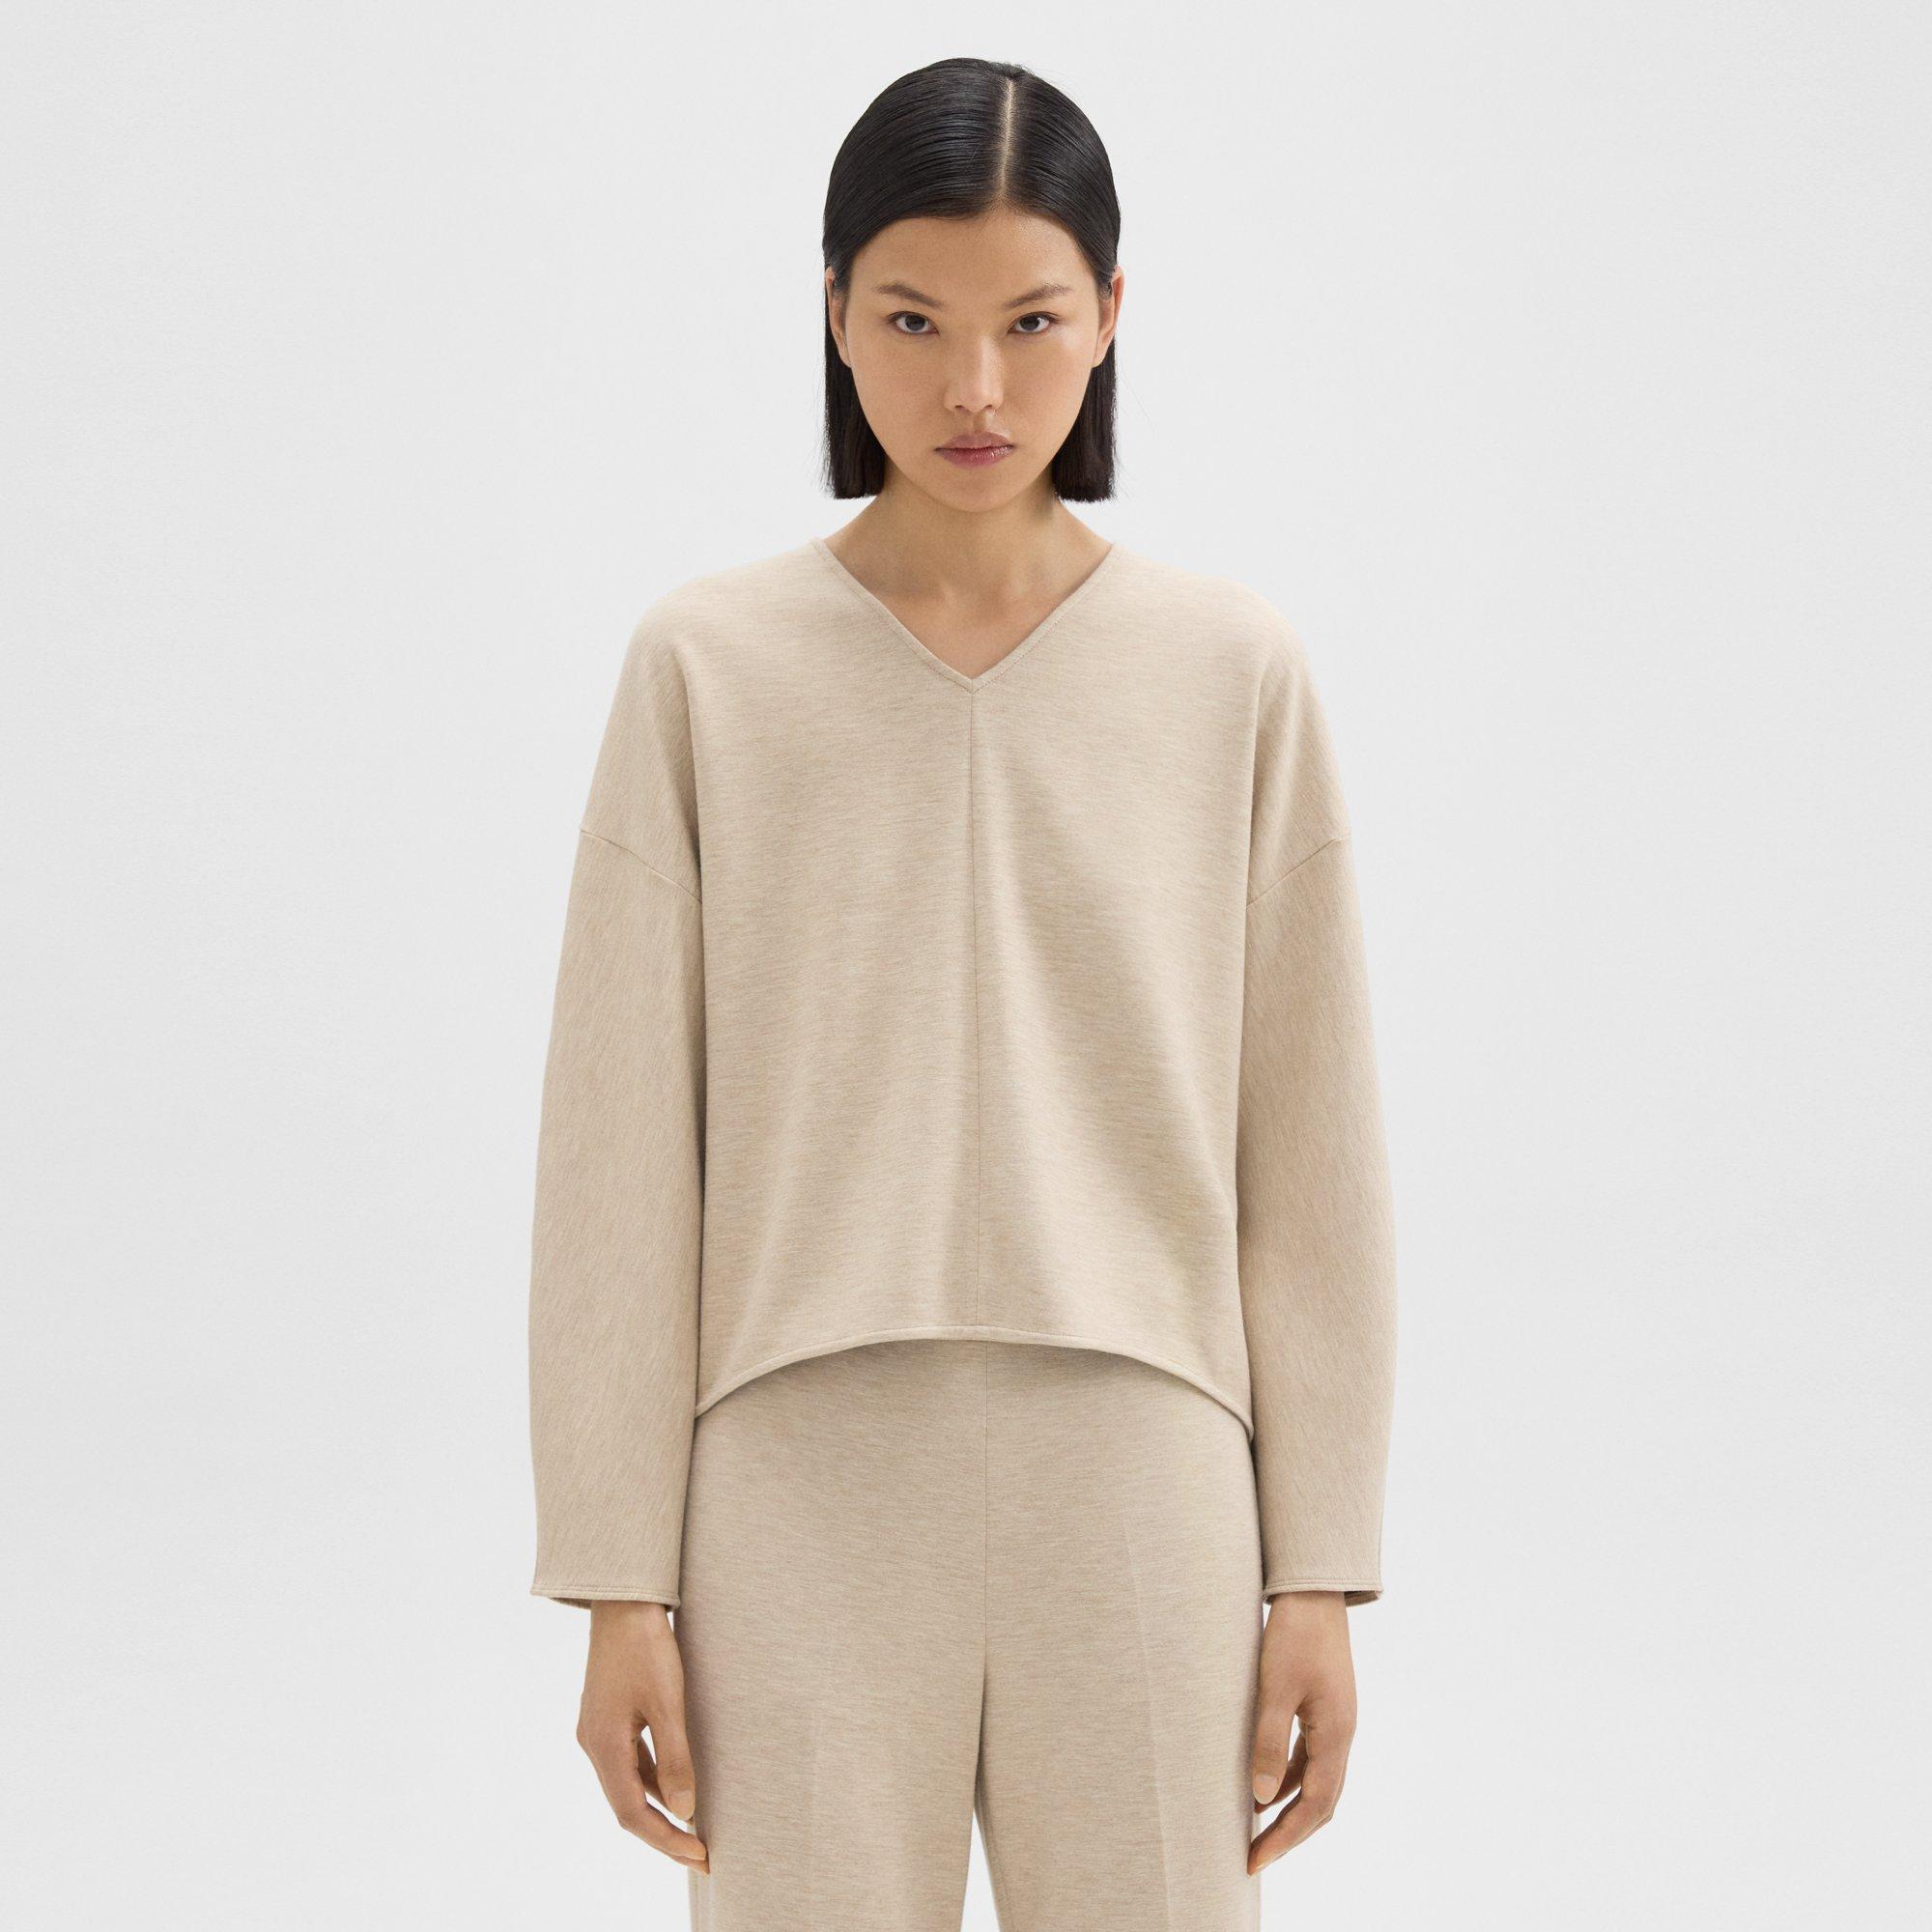 Theory Sculpted V-Neck Top in Double-Knit Jersey